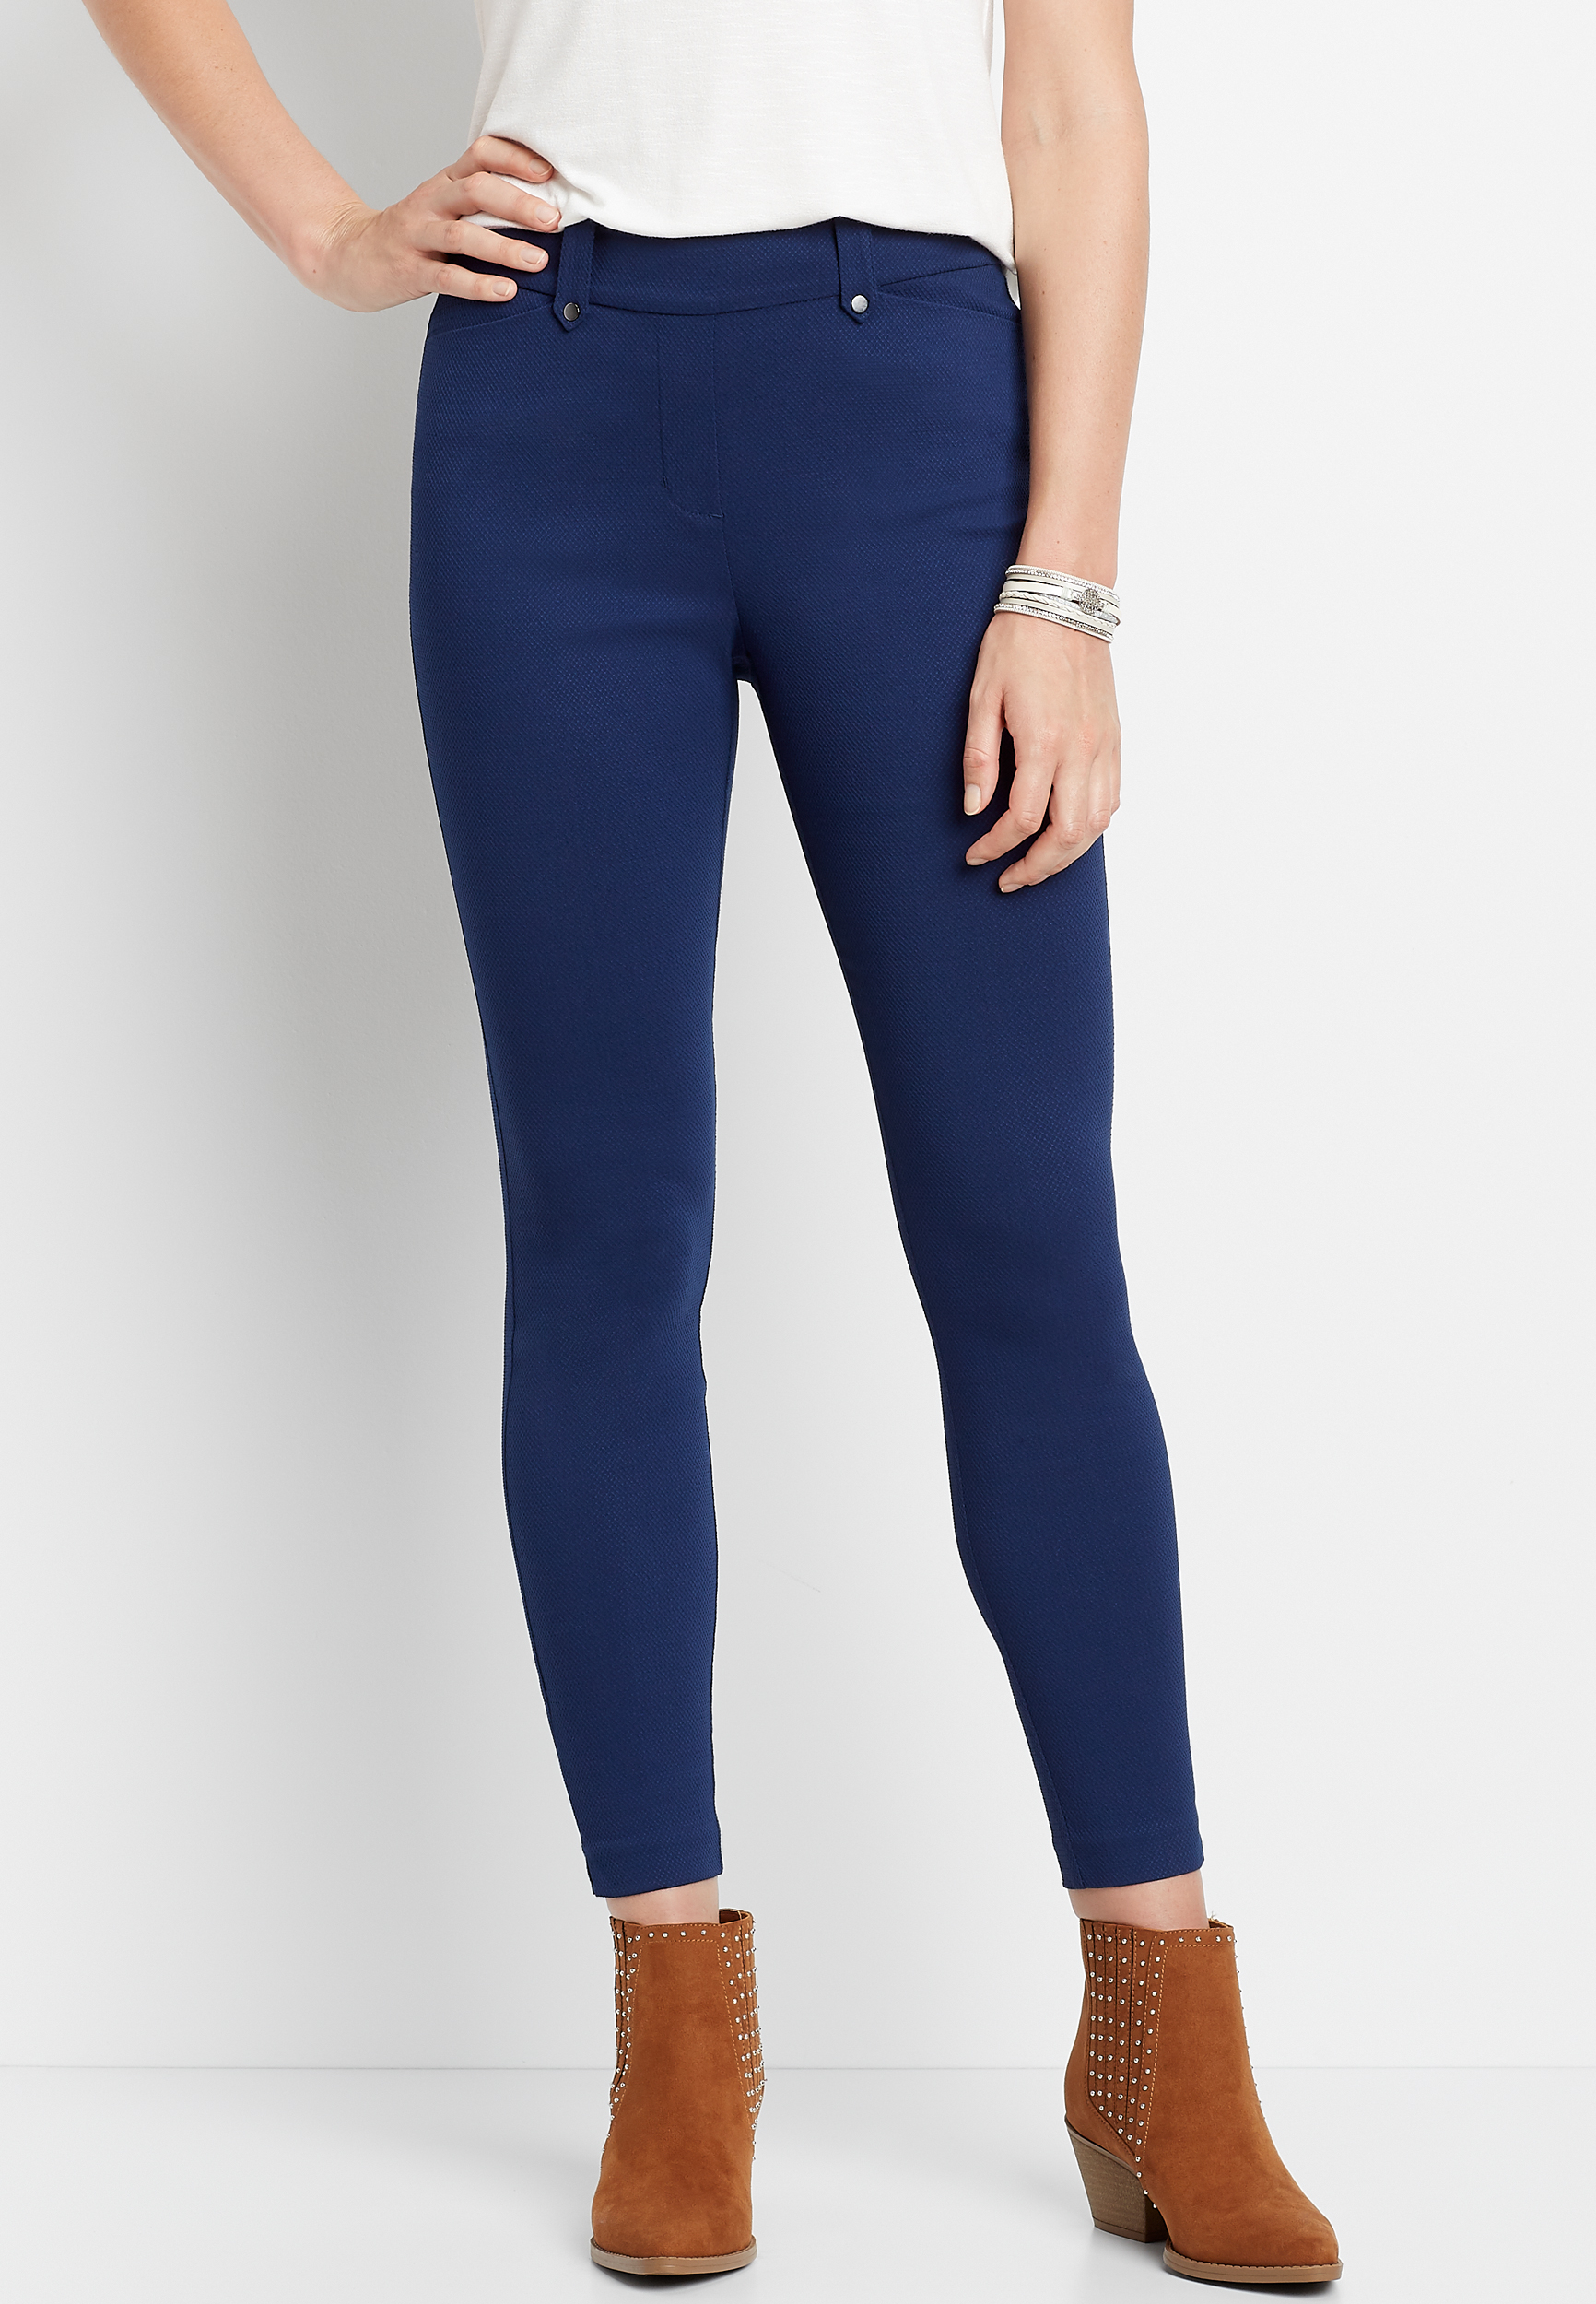 Navy Textured Bengaline Skinny Ankle Pant | maurices